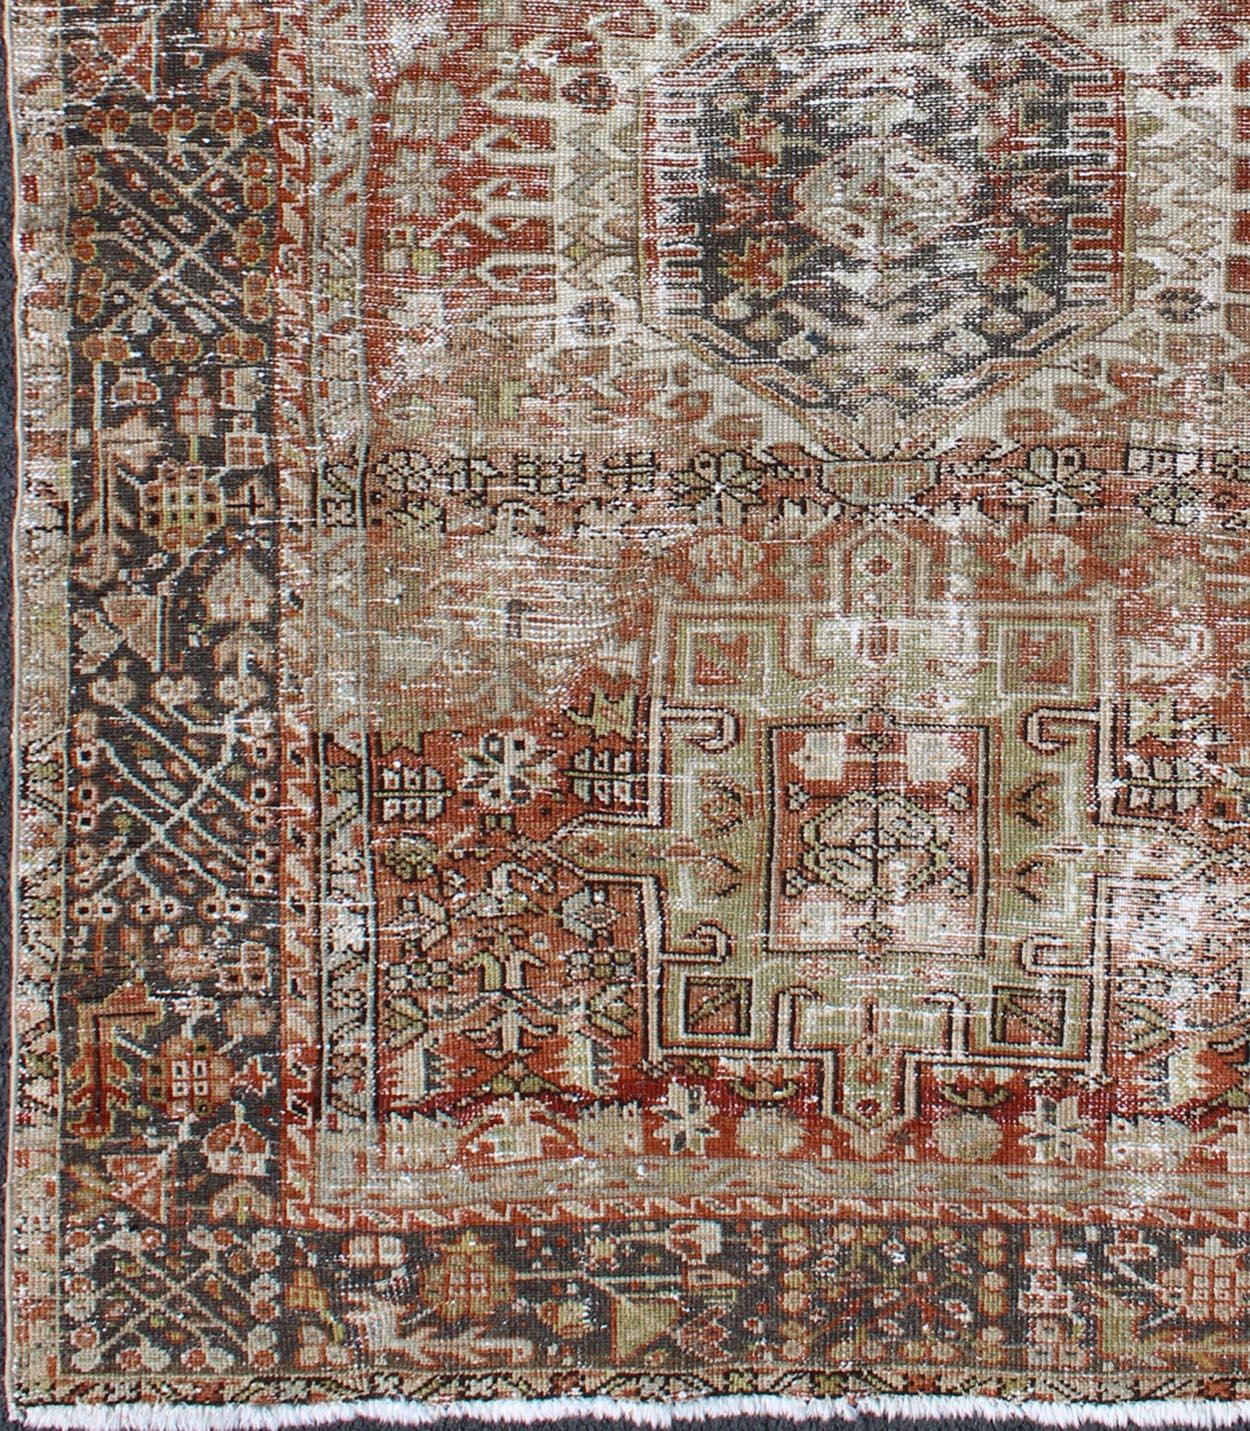 Vintage Persian Karadjeh rug with three medallion geometric tribal design, rug gng-4766, country of origin / type: Iran / Karadjeh, circa 1930

This early 20th century, handwoven antique Persian Karadjeh rug features a red-colored field imbued